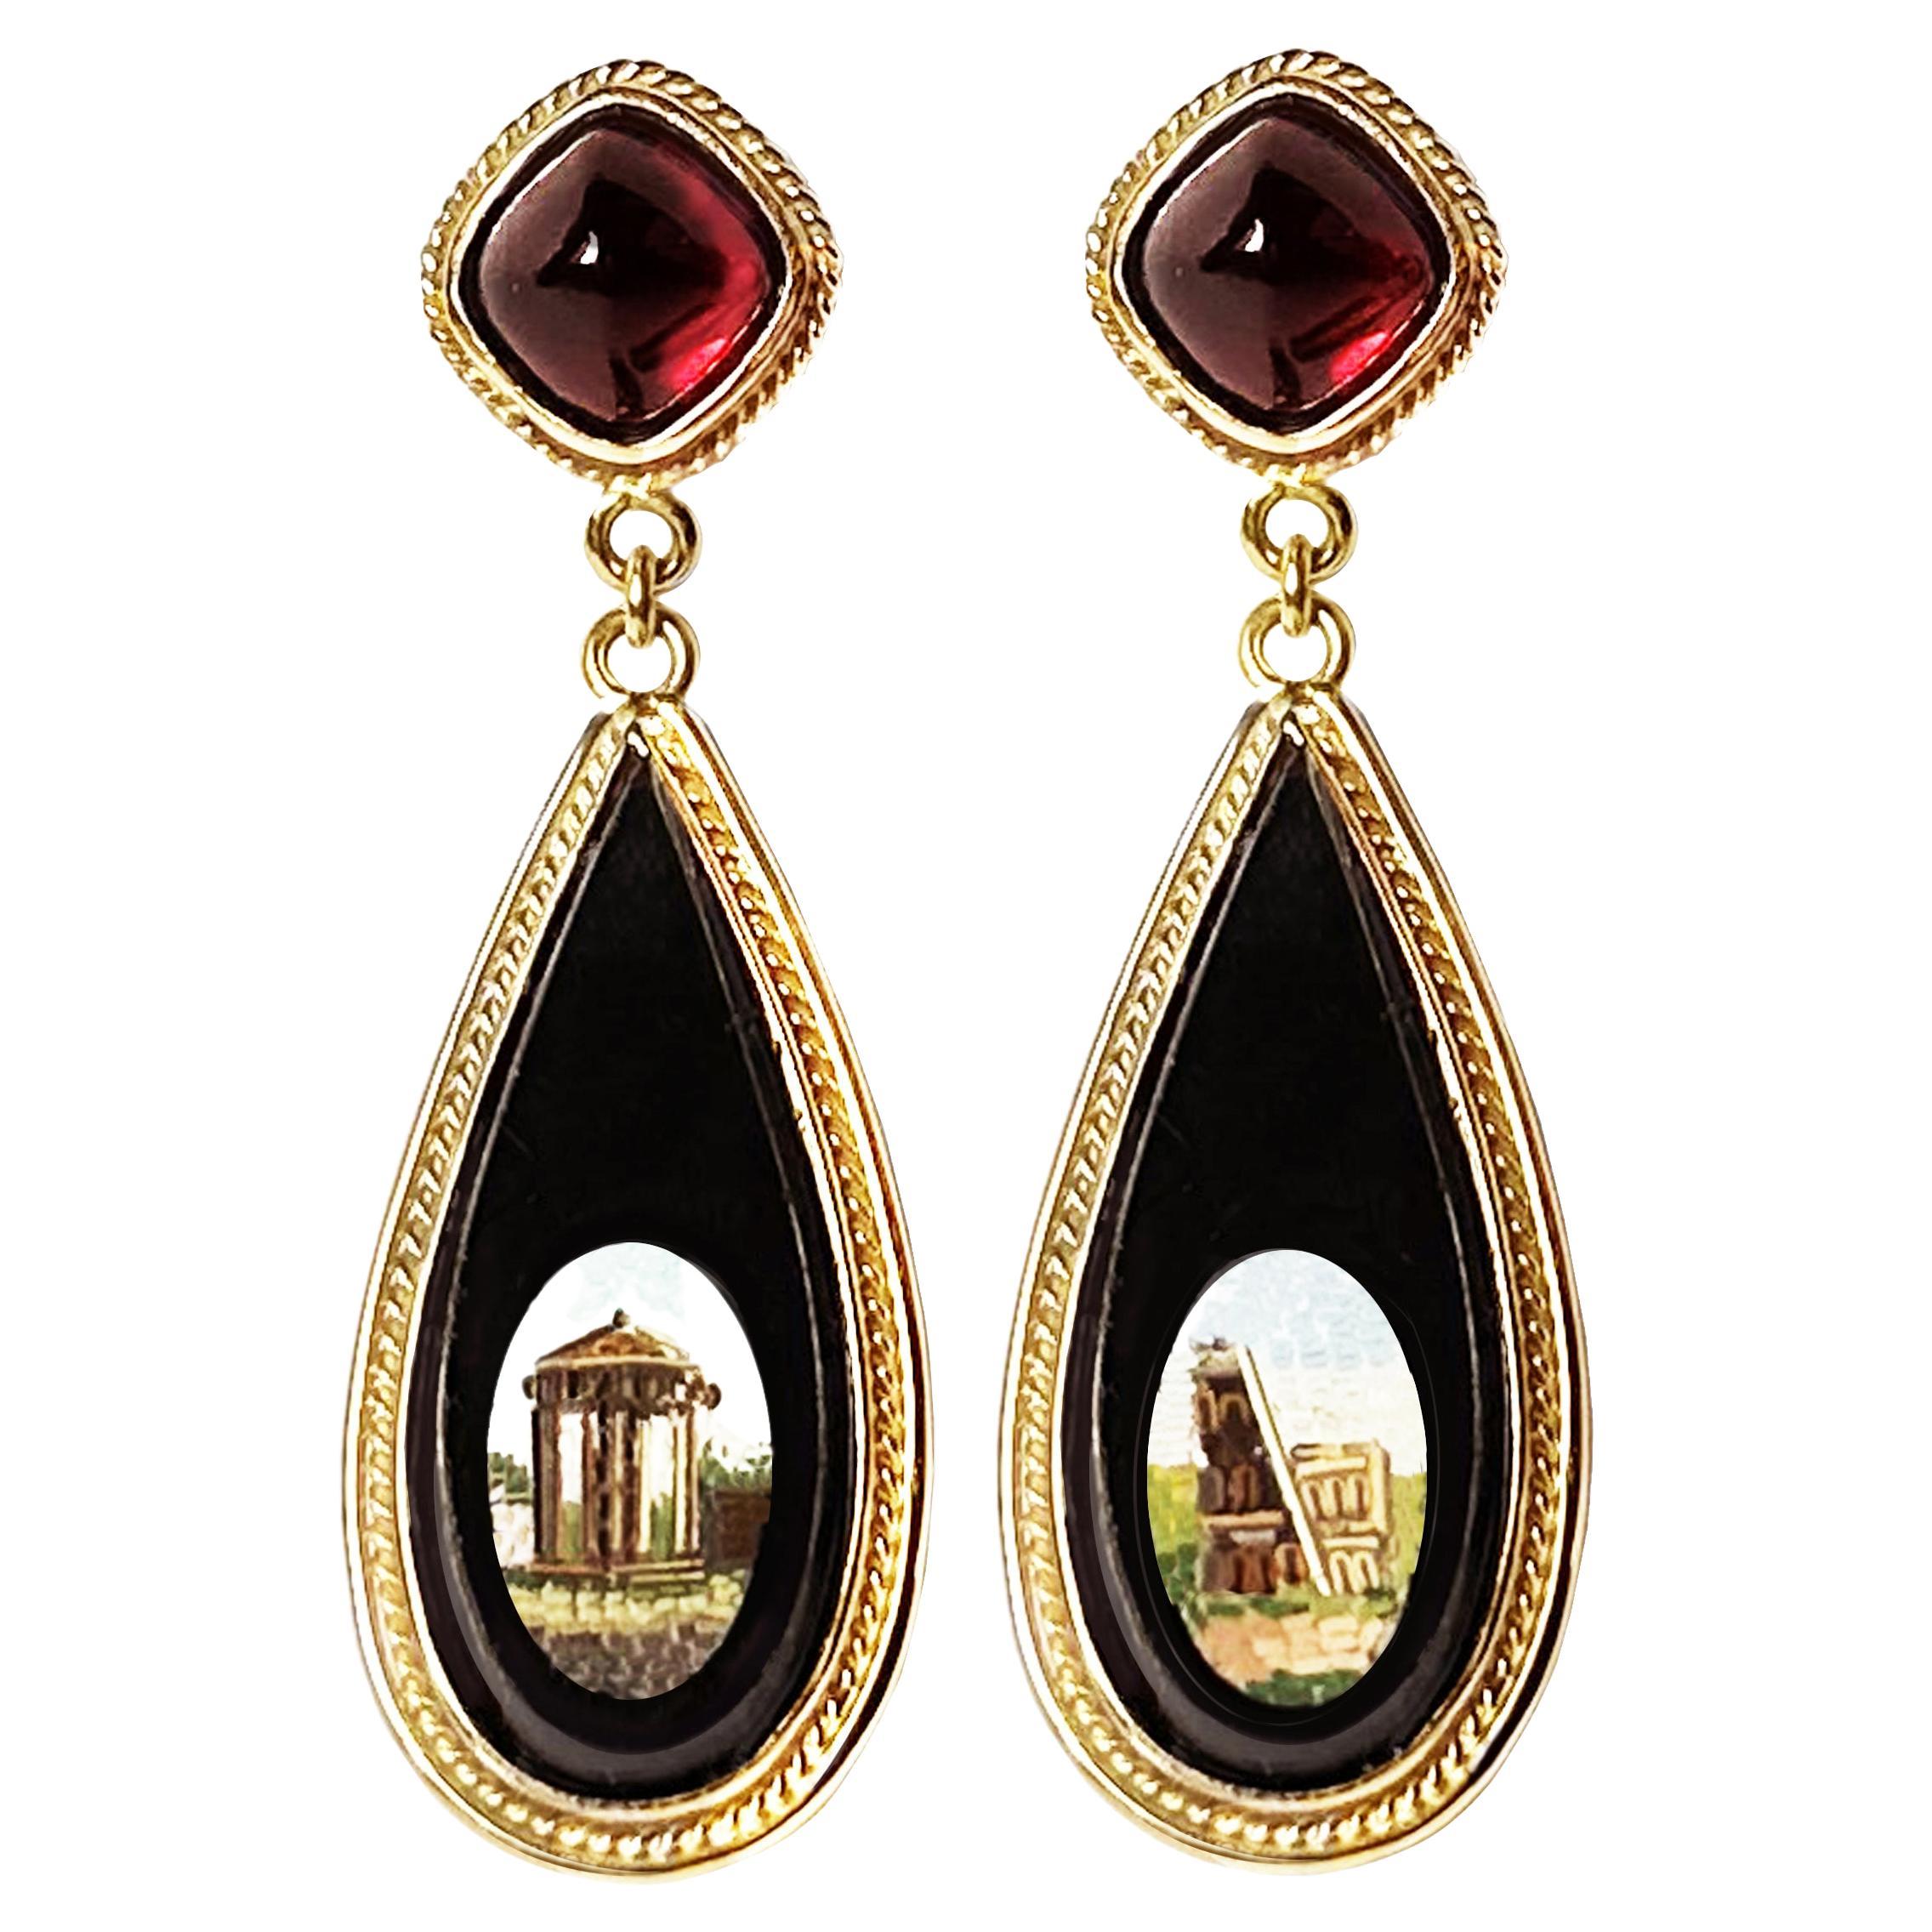 Micromosaics  depicting Colosseum and Temple of Vesta 18 kt Gold Earrings   For Sale